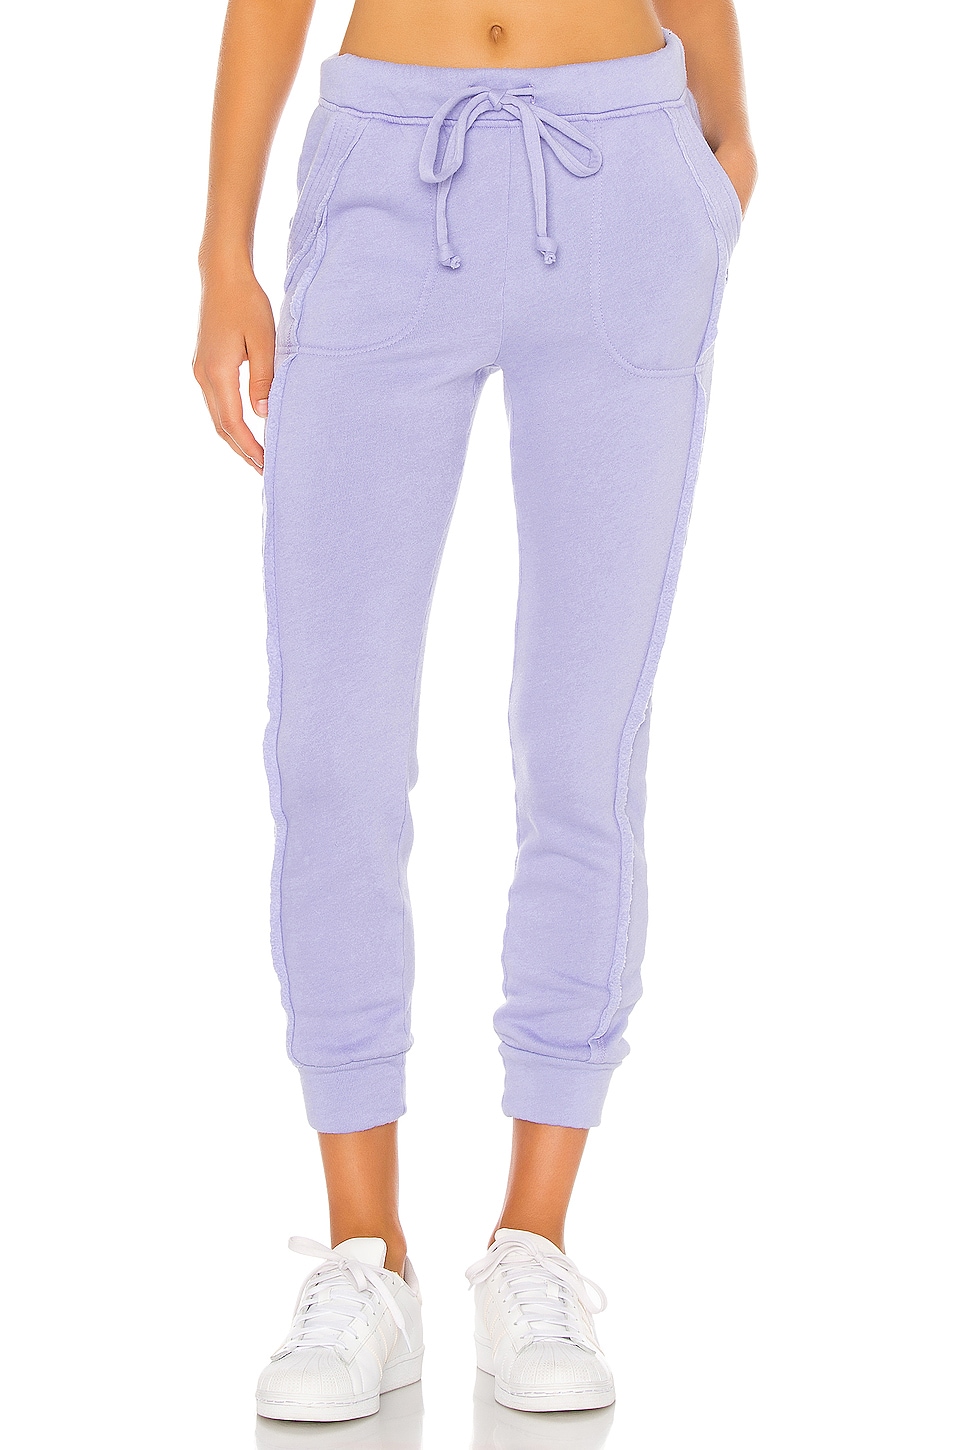 FP Movement by Free People Womens Slouch It Purple Jogger Pants M BHFO 9000 